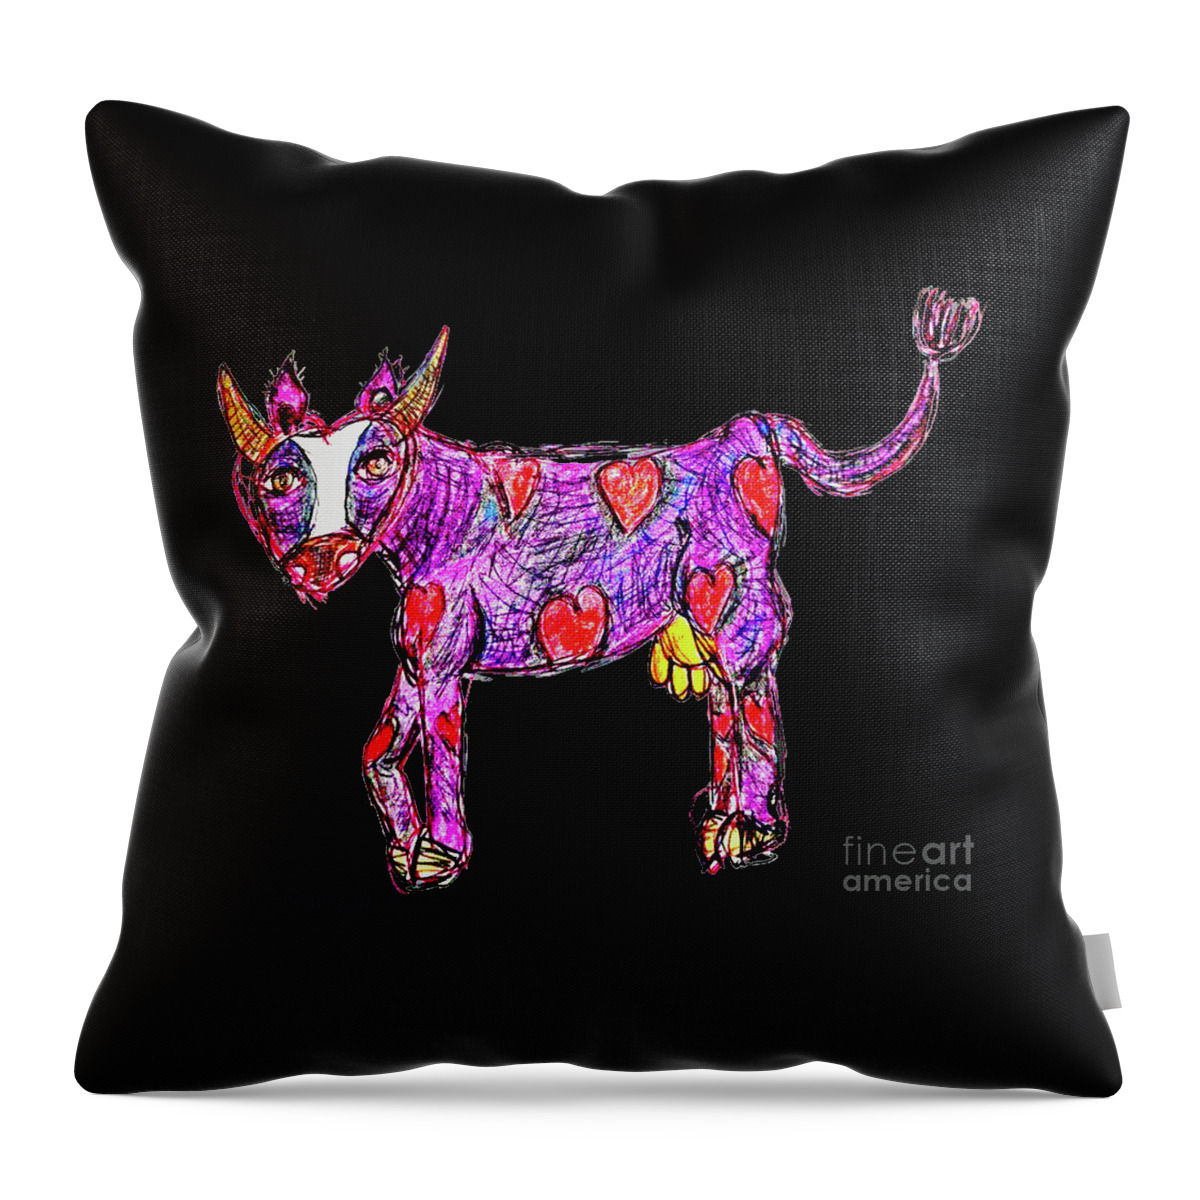 Cow Throw Pillow featuring the digital art Sweet Cow by Mimulux Patricia No